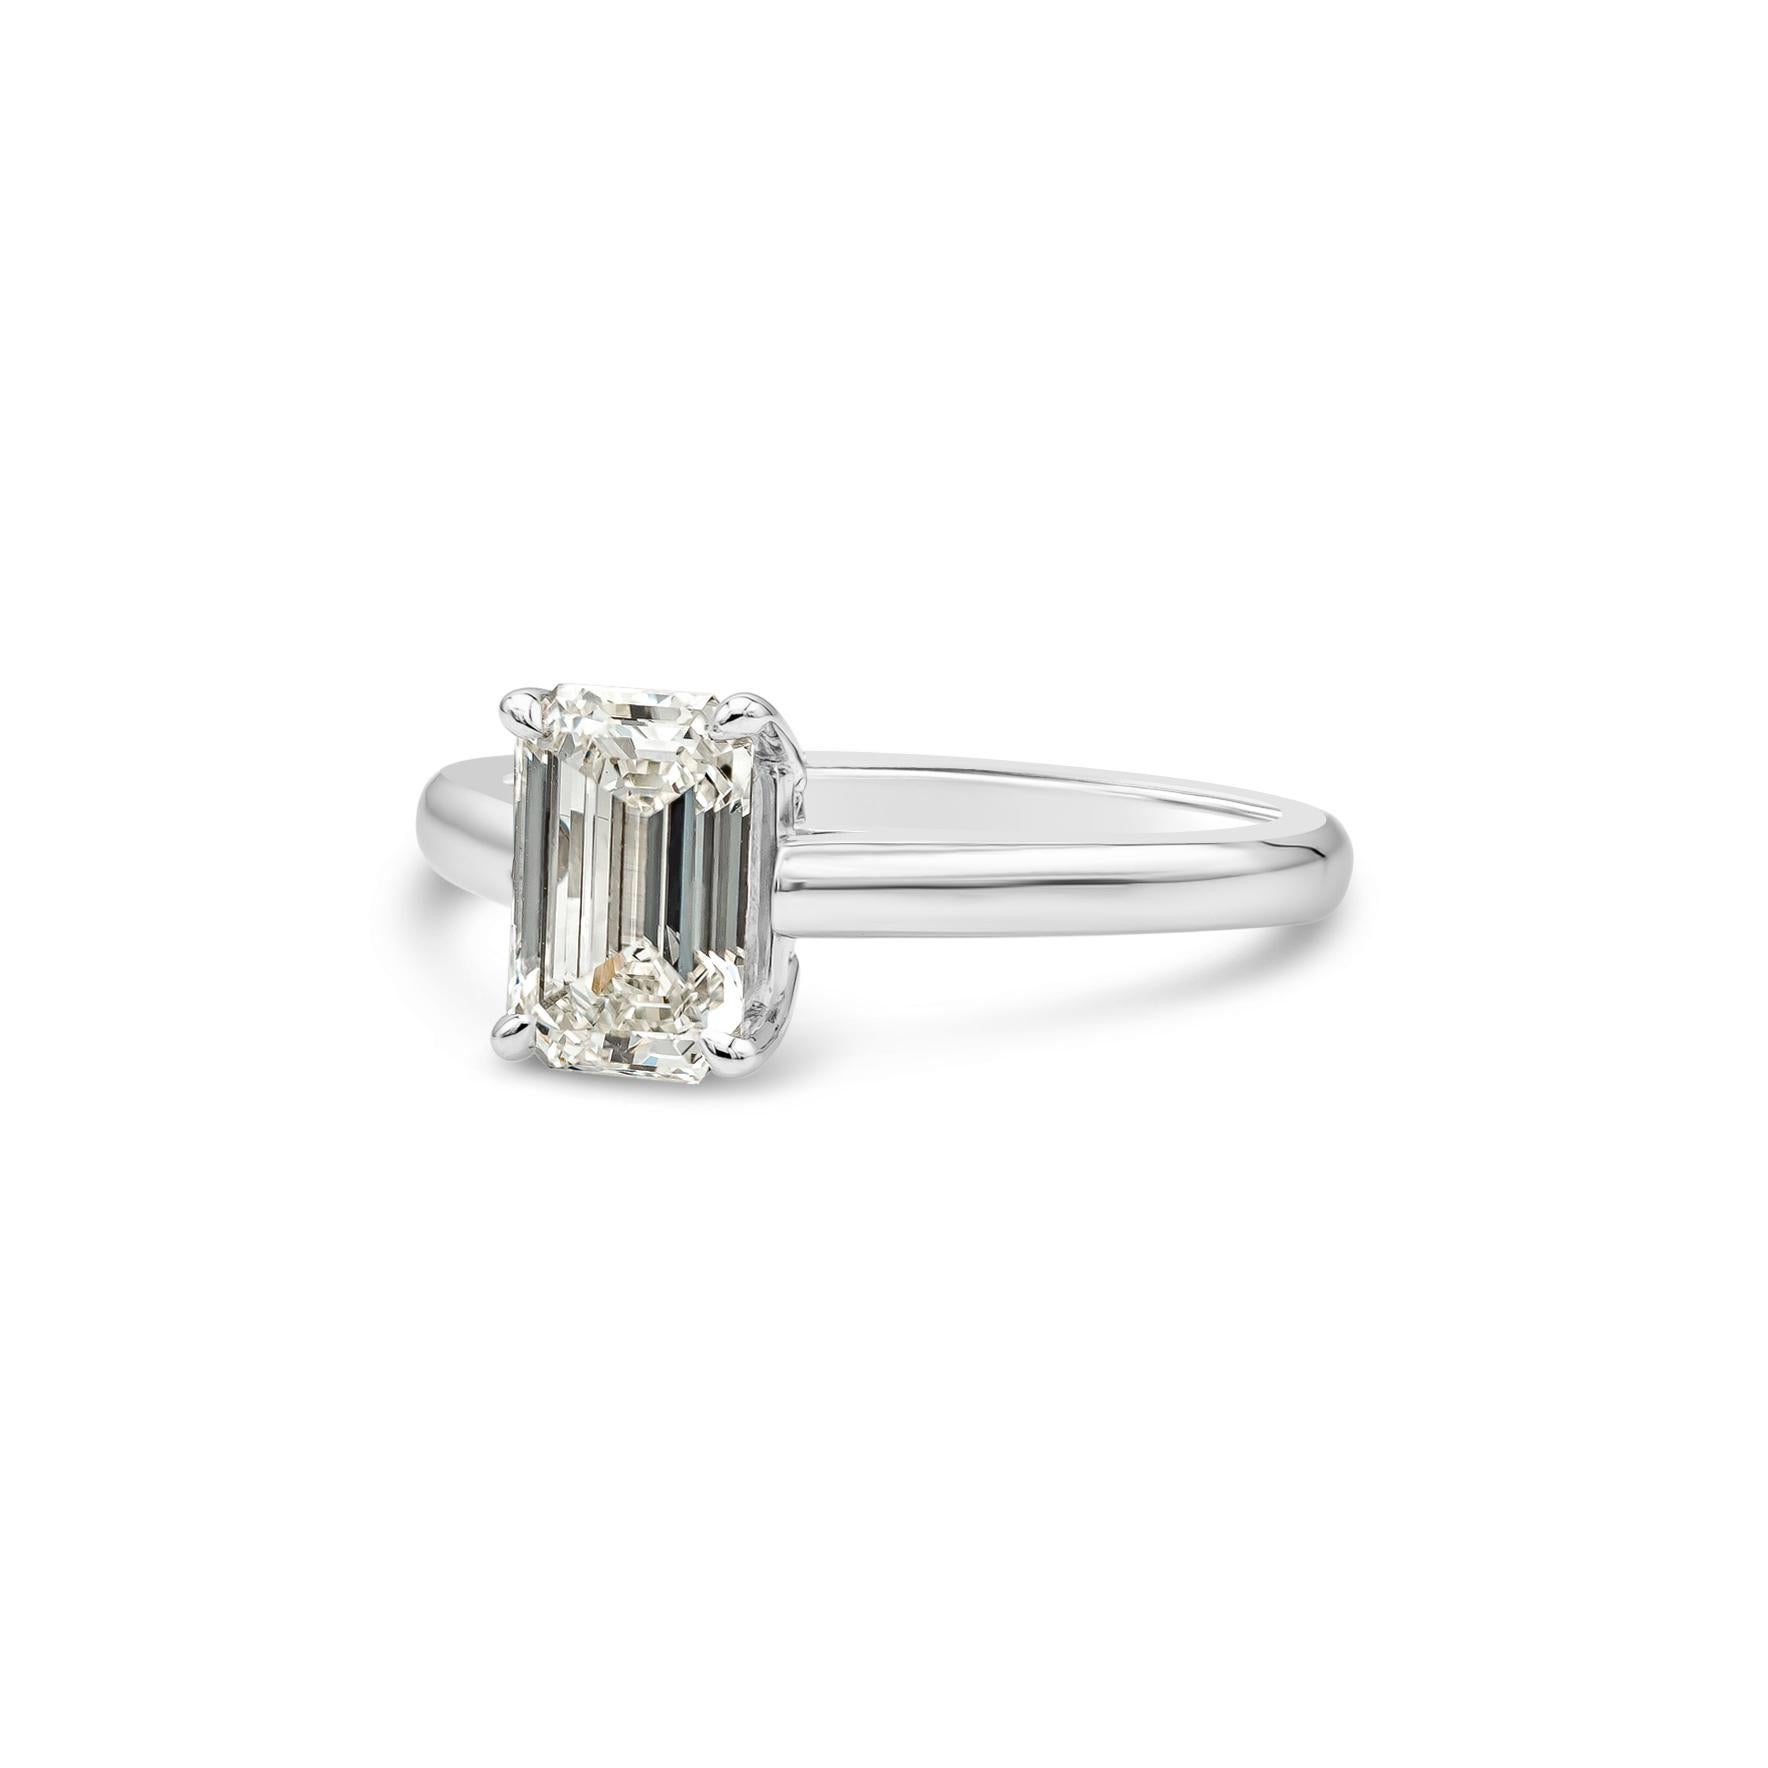 A simple style engagement ring that exudes a lot of elegance. Showcasing a 1.33 carat emerald cut diamond certified by GIA as L color, VS2 clarity, set in a thin solitaire style mounting made in platinum. Size 6.25 US (sizable upon request).

Style